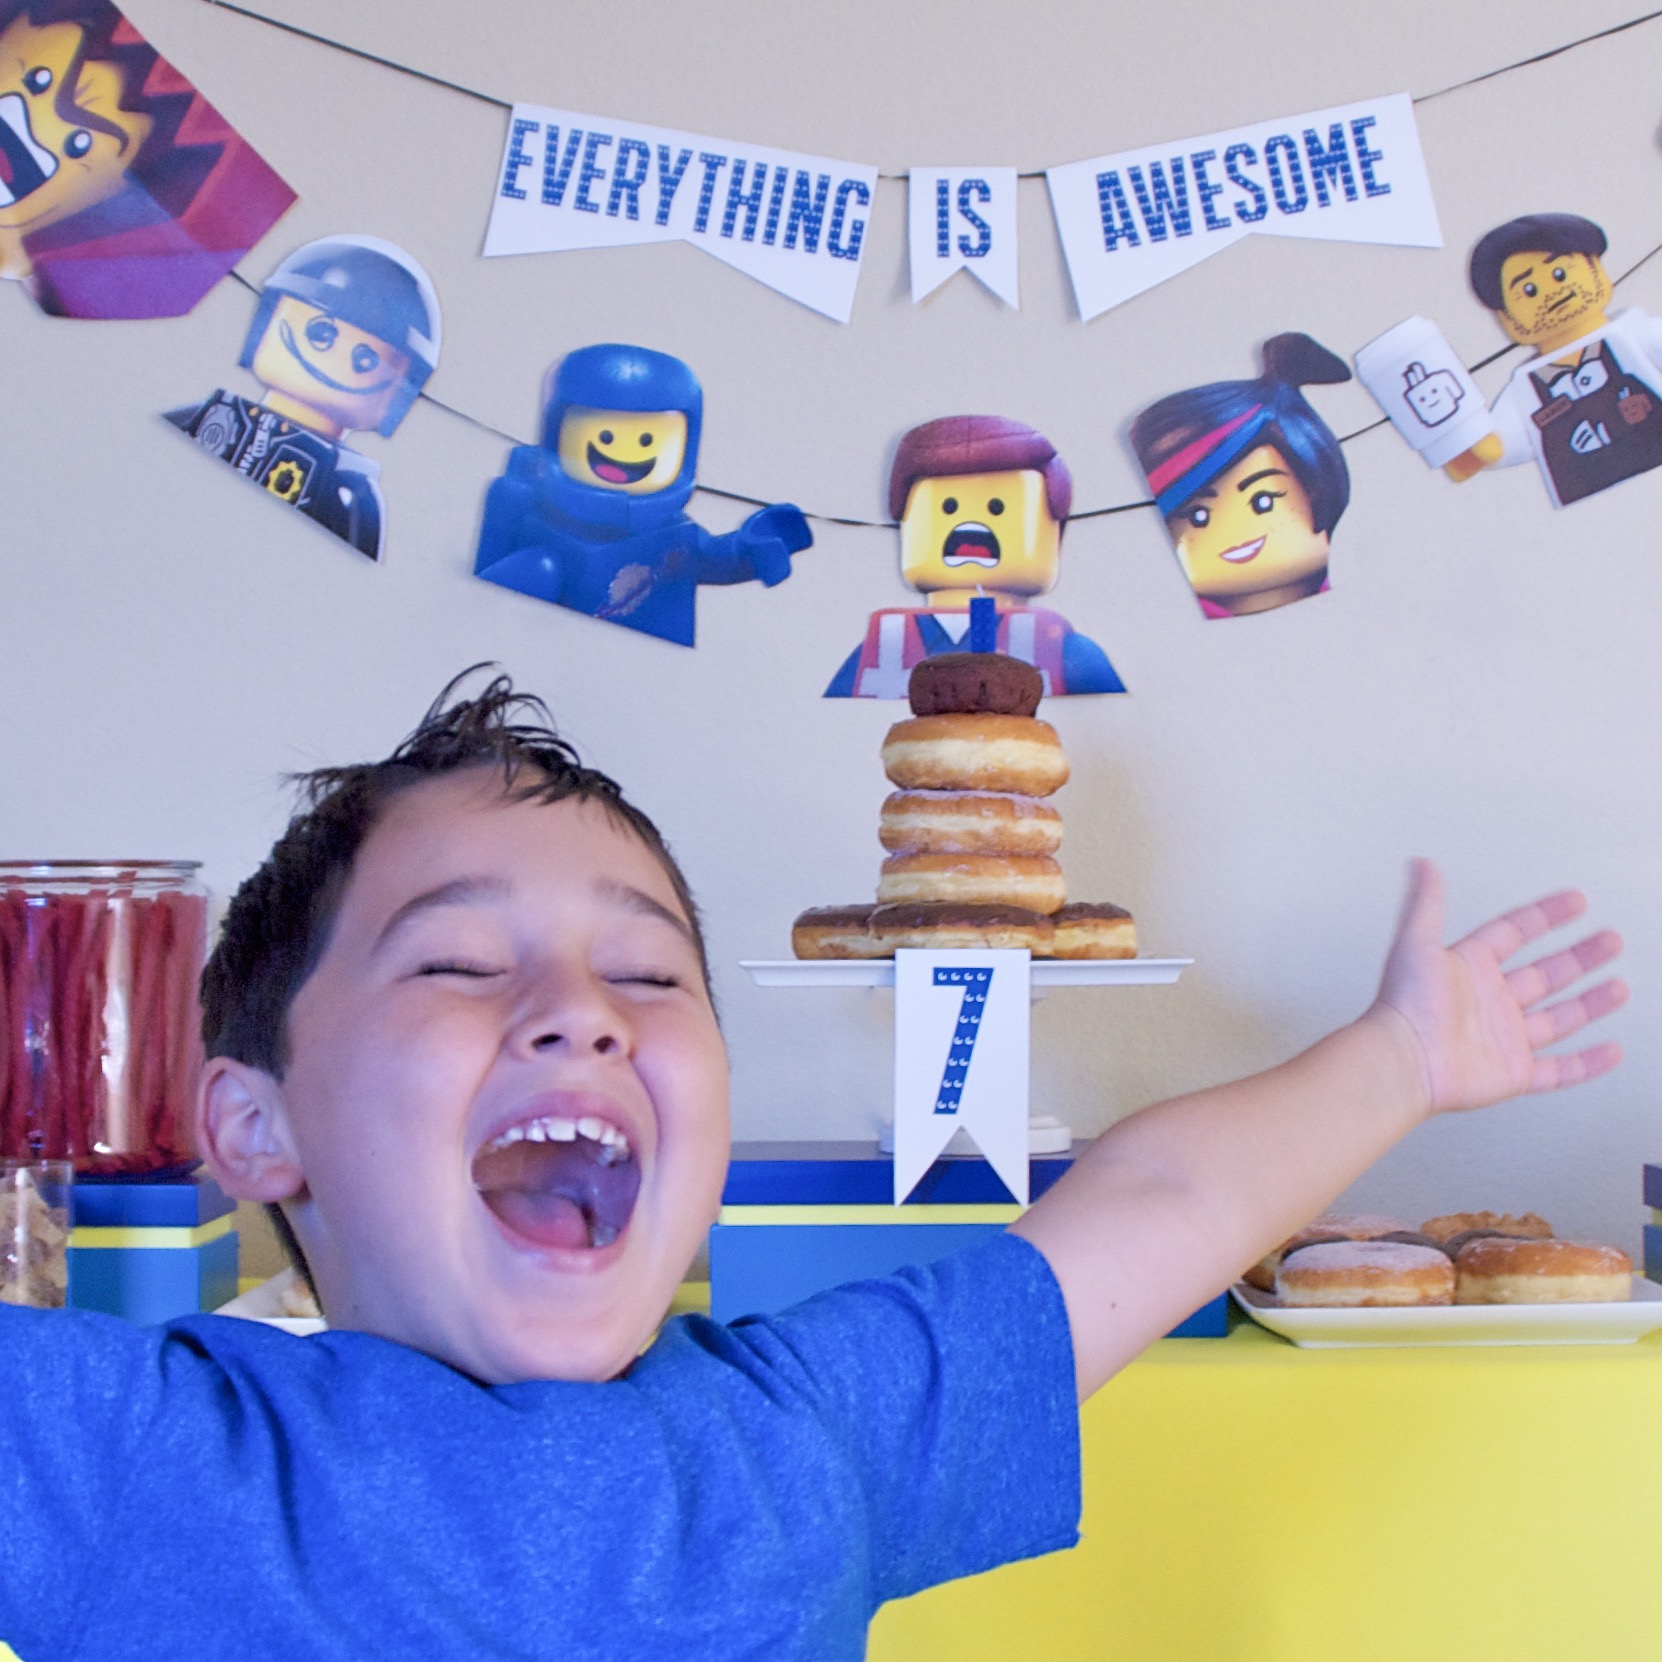 "everything is awesome" Lego birthday party 